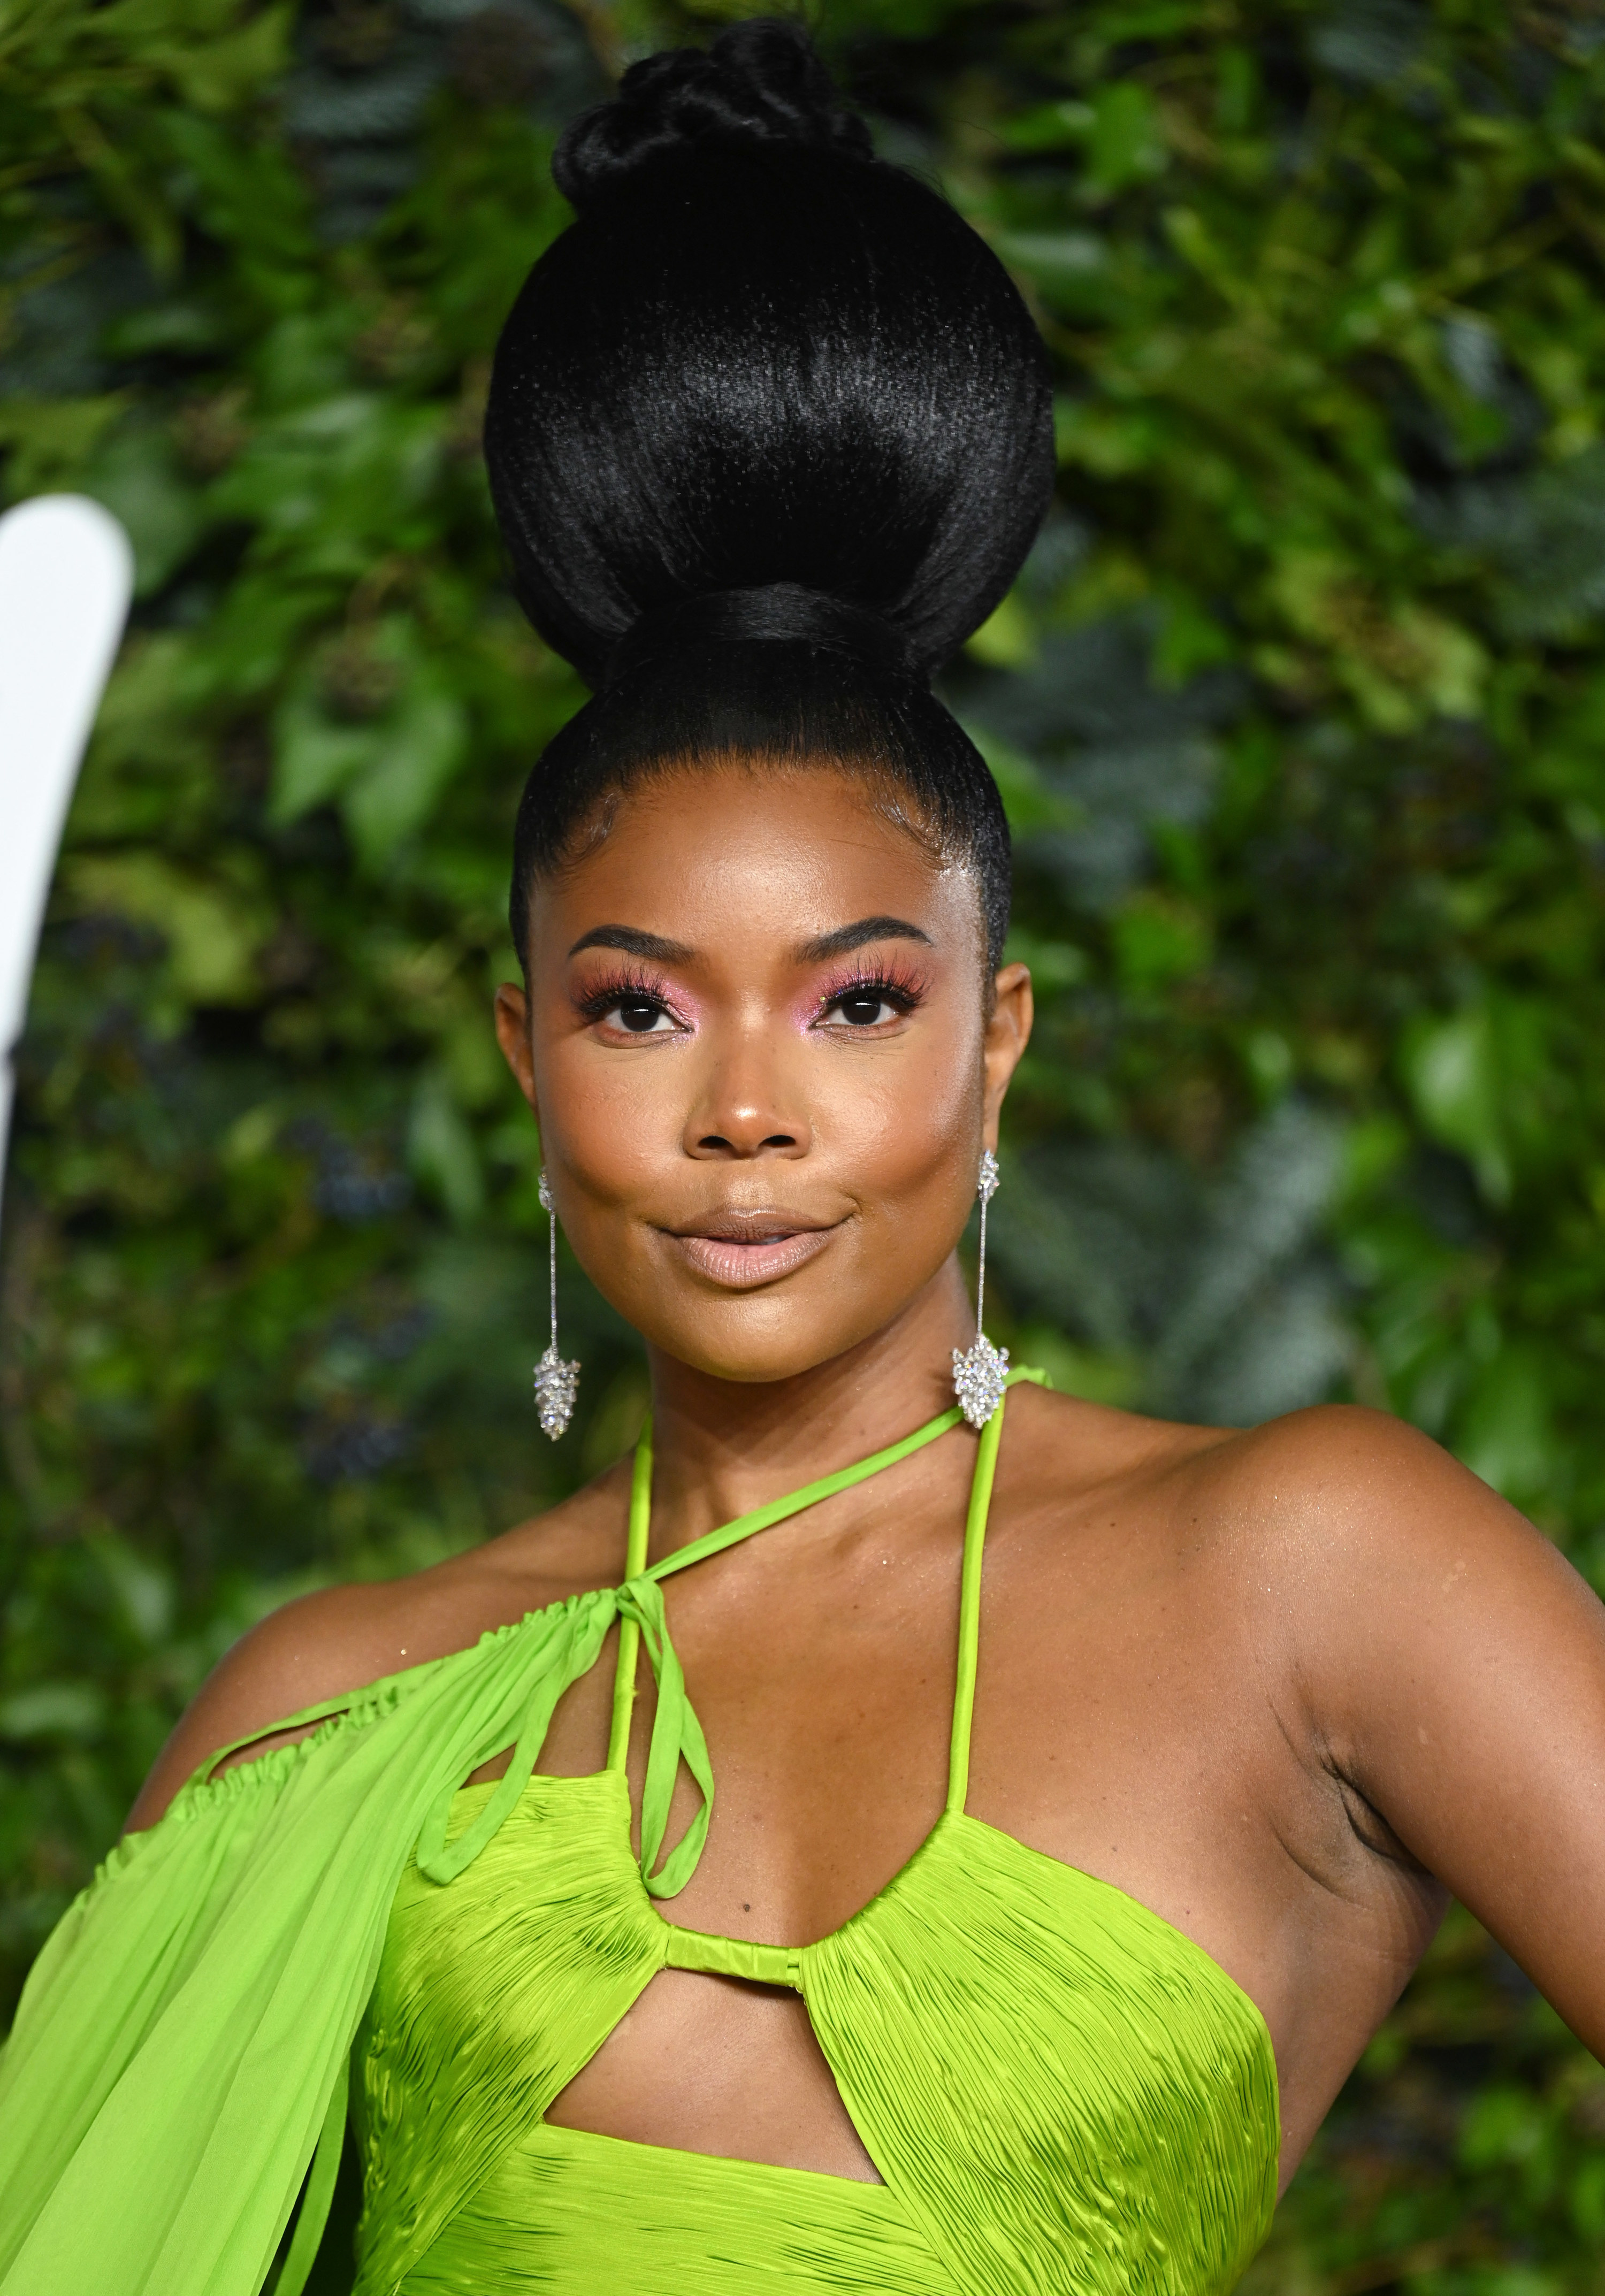 Gabrielle Union poses at The Fashion Awards on November 29, 2021